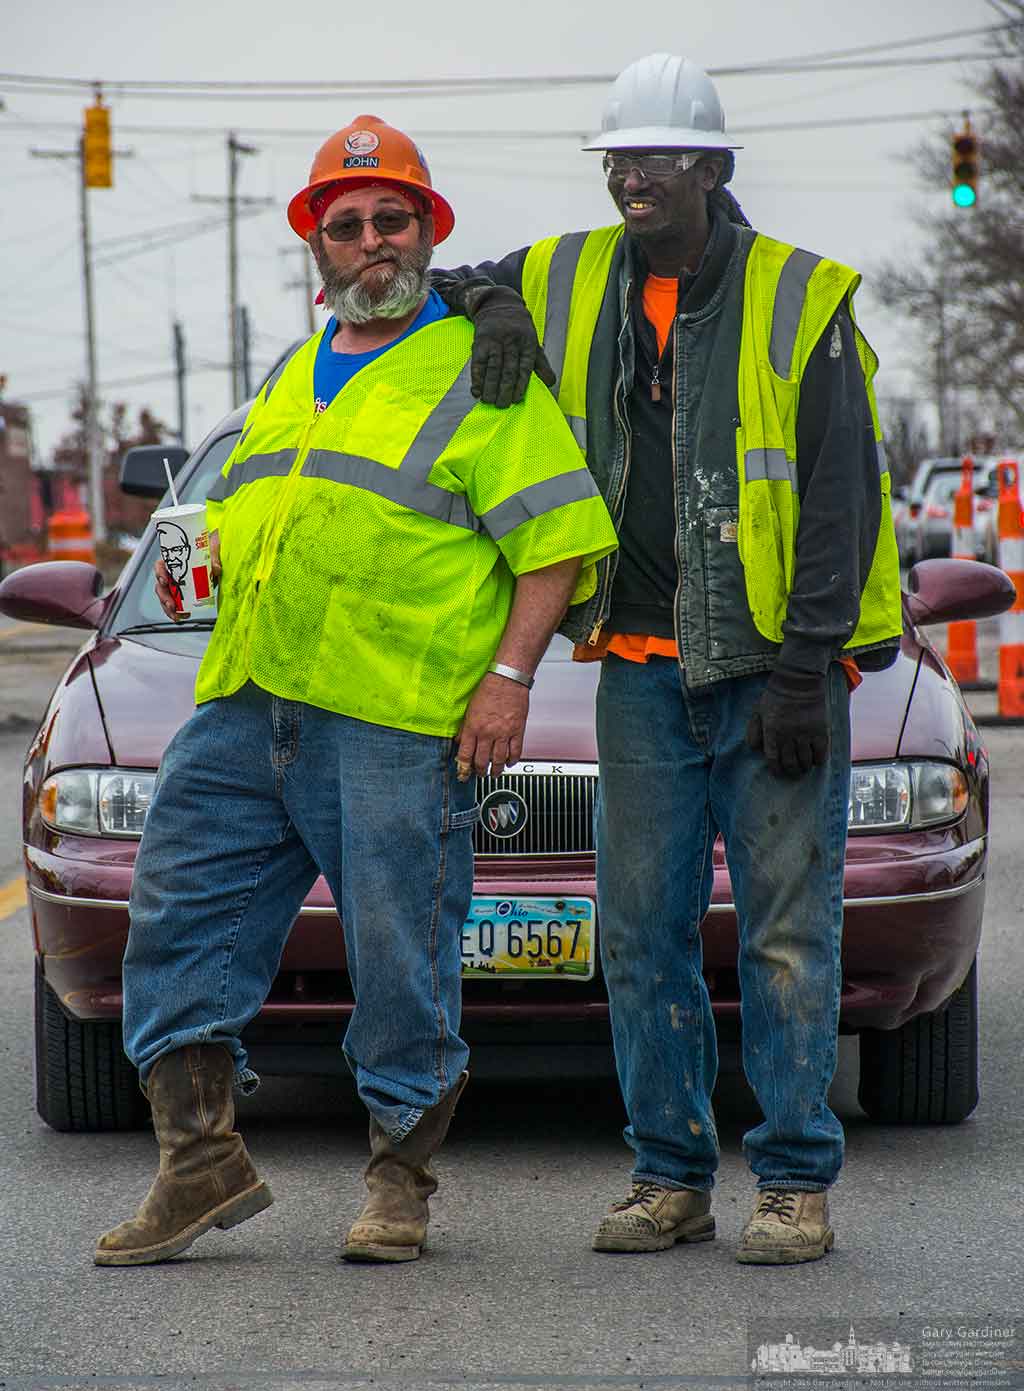 A road work crew takes a moment to pose while stopping traffic to repair sections of State street torn up during recent construction to install underground utilities beneath the roadway. My Final Photo for March 9, 2016.